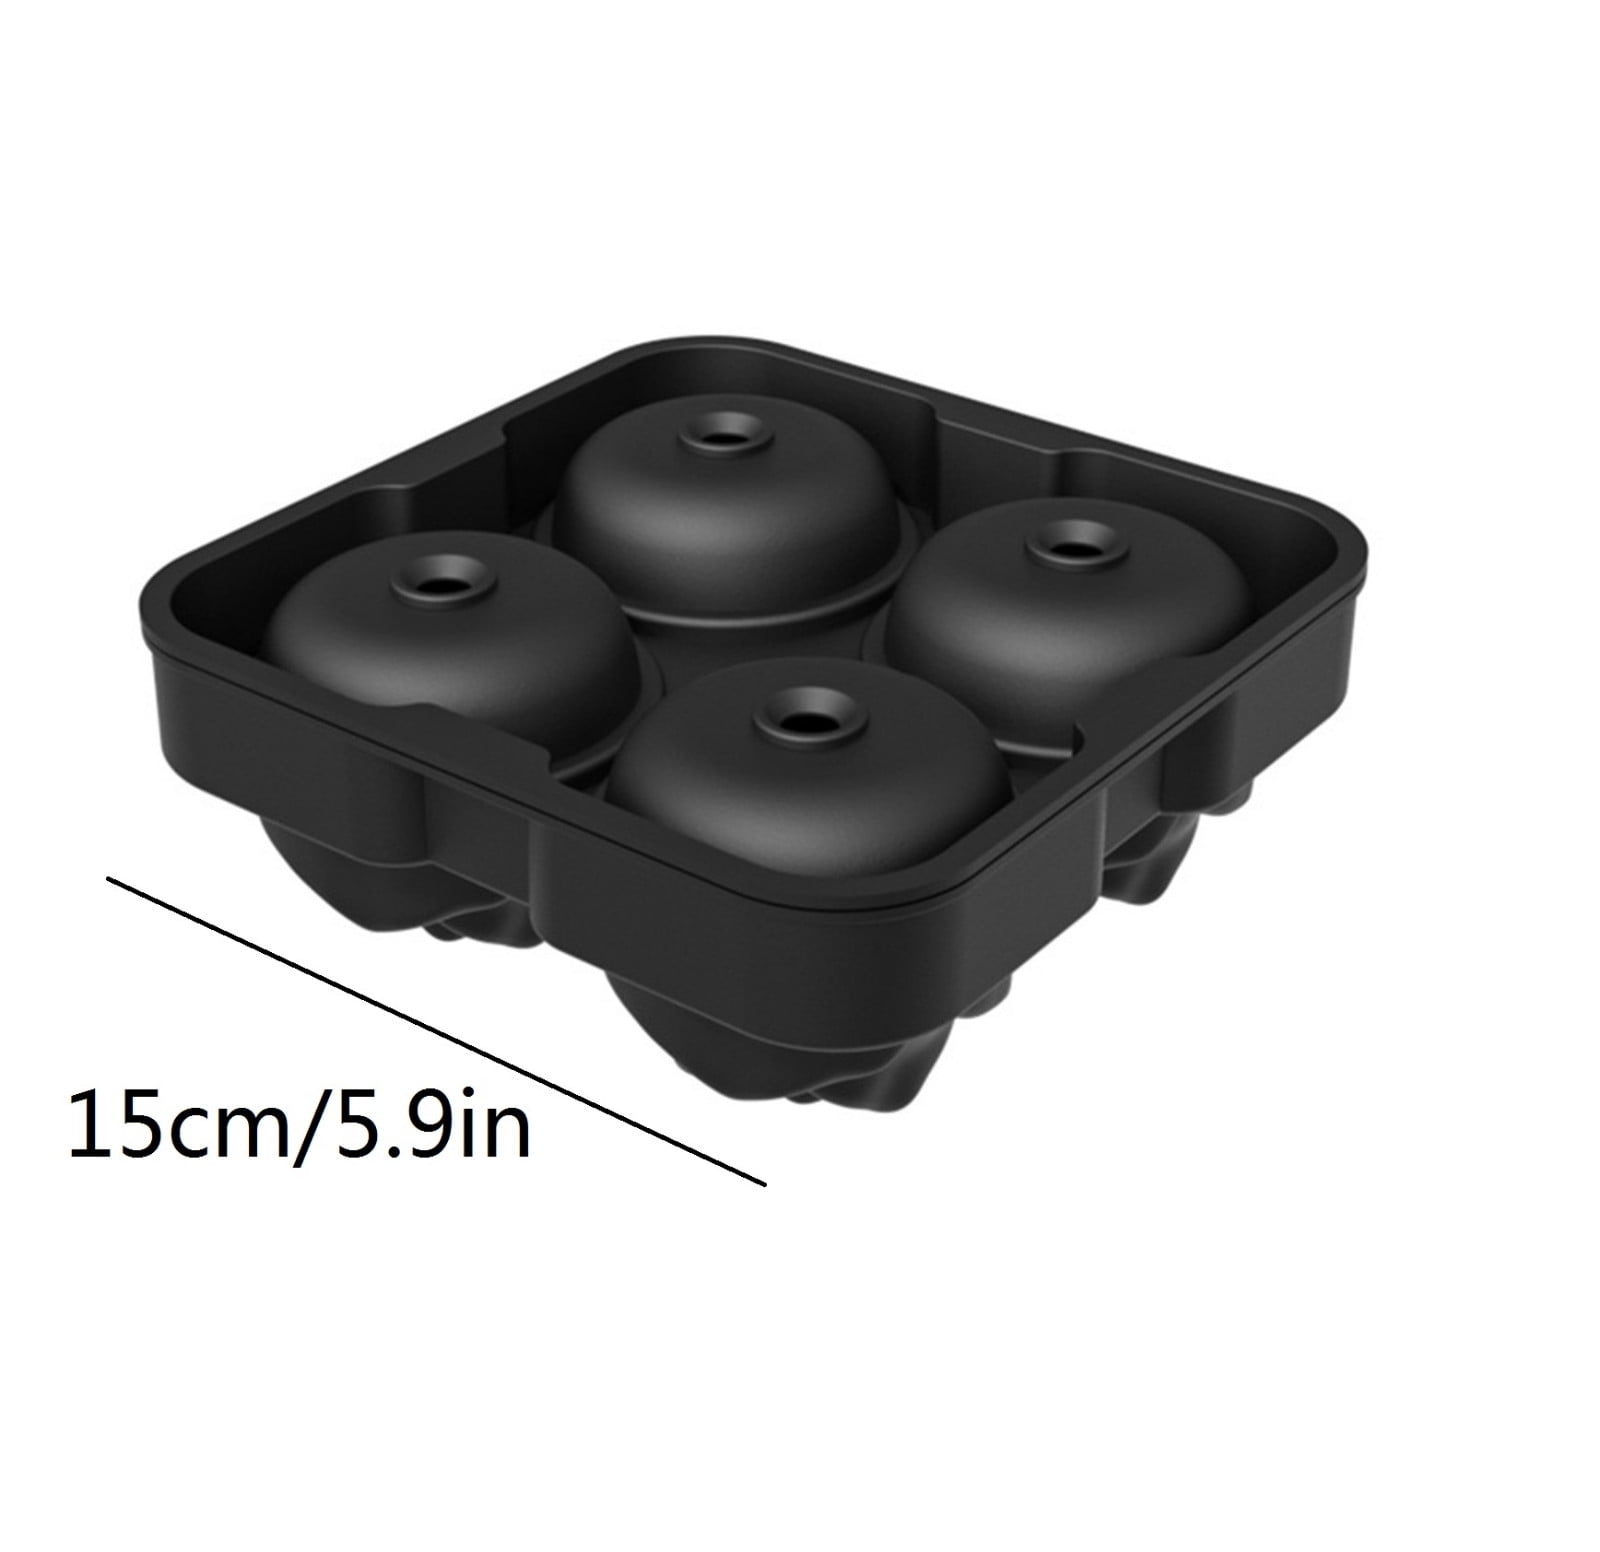  Ice Cube Tray, Mikiwon 2 inch Rose Ice Cube Trays With Covers,  6 Cavity Silicone Rose Ice Ball Maker, Easy Release Large Ice Cube Form for  Chilled Cocktails, Whiskey, Bourbon 